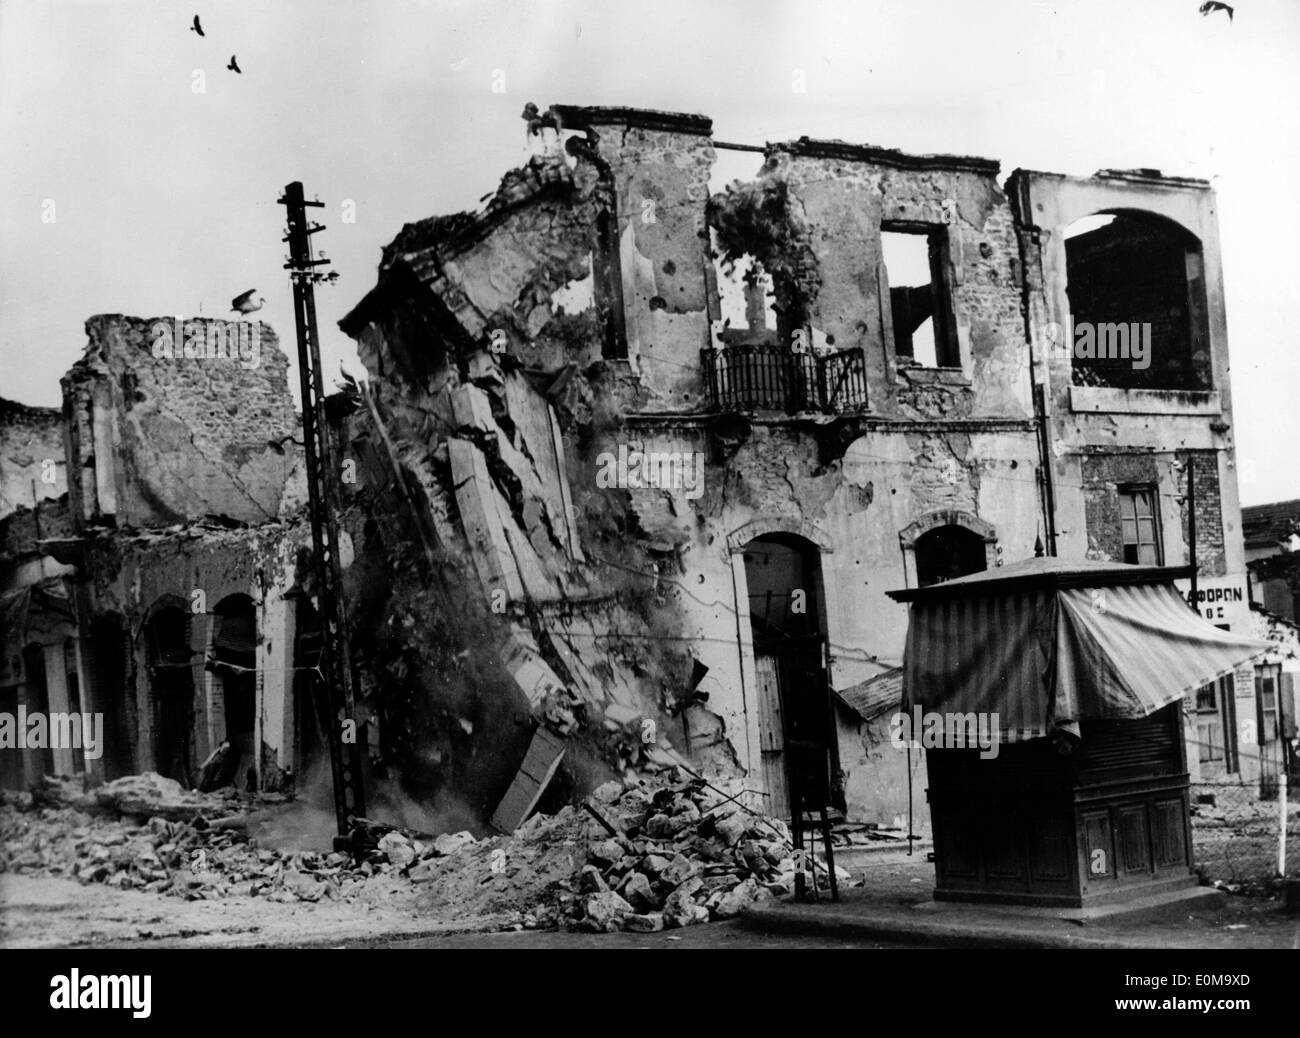 NATURAL DISASTERS: 1954 Earthquake in Central Greece Stock Photo